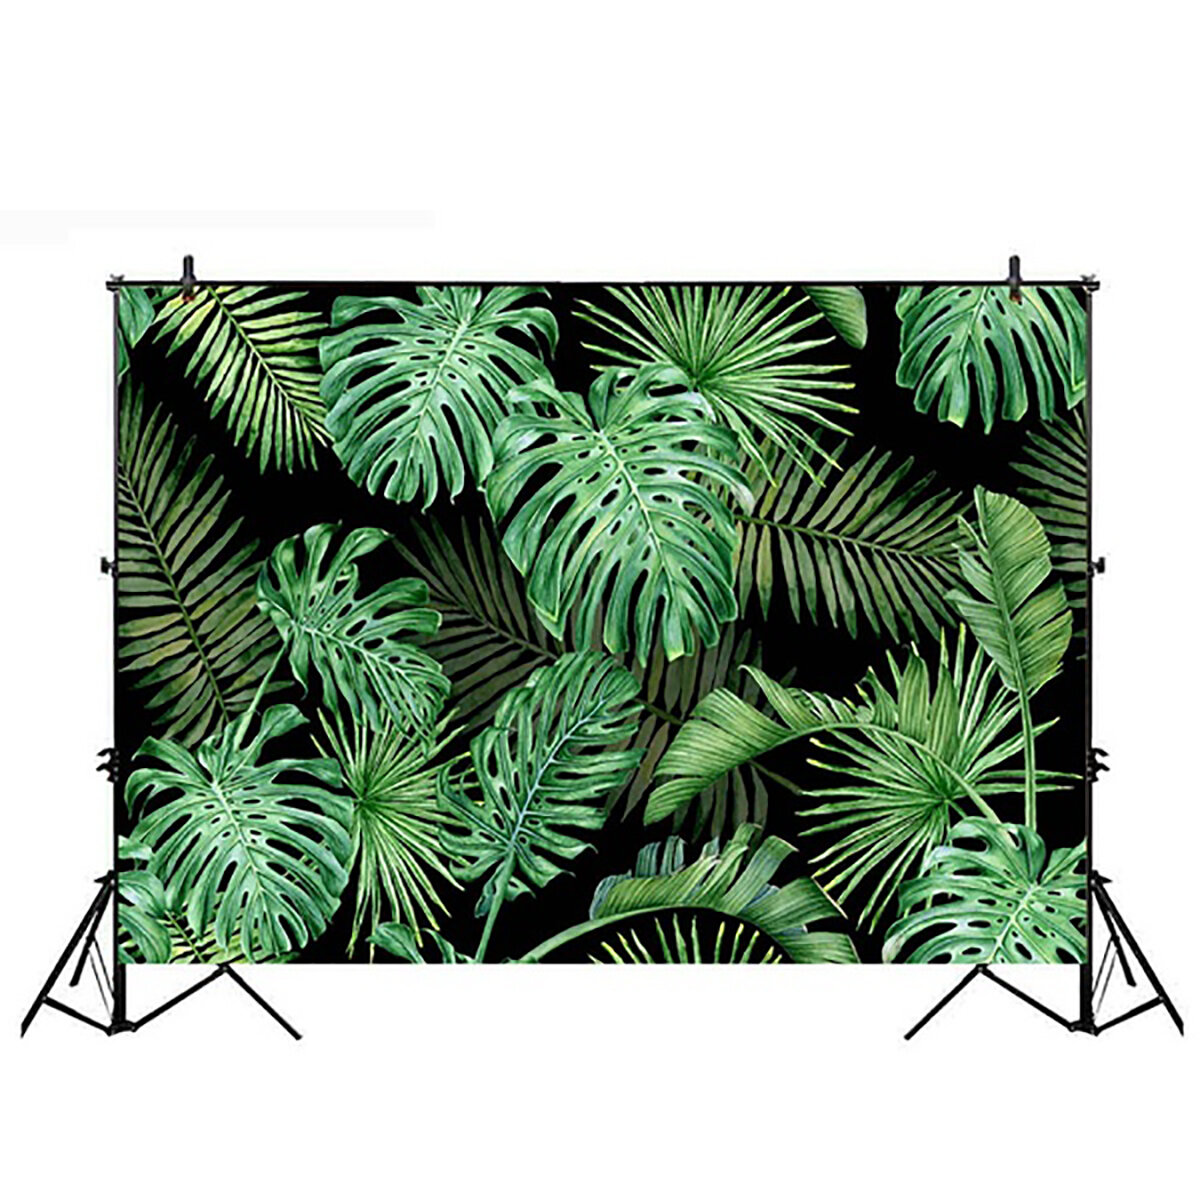 Forest Photography Backdrops Spring Photo Booth 3 Sizes Background Studio Safari Party Backdrop Viny